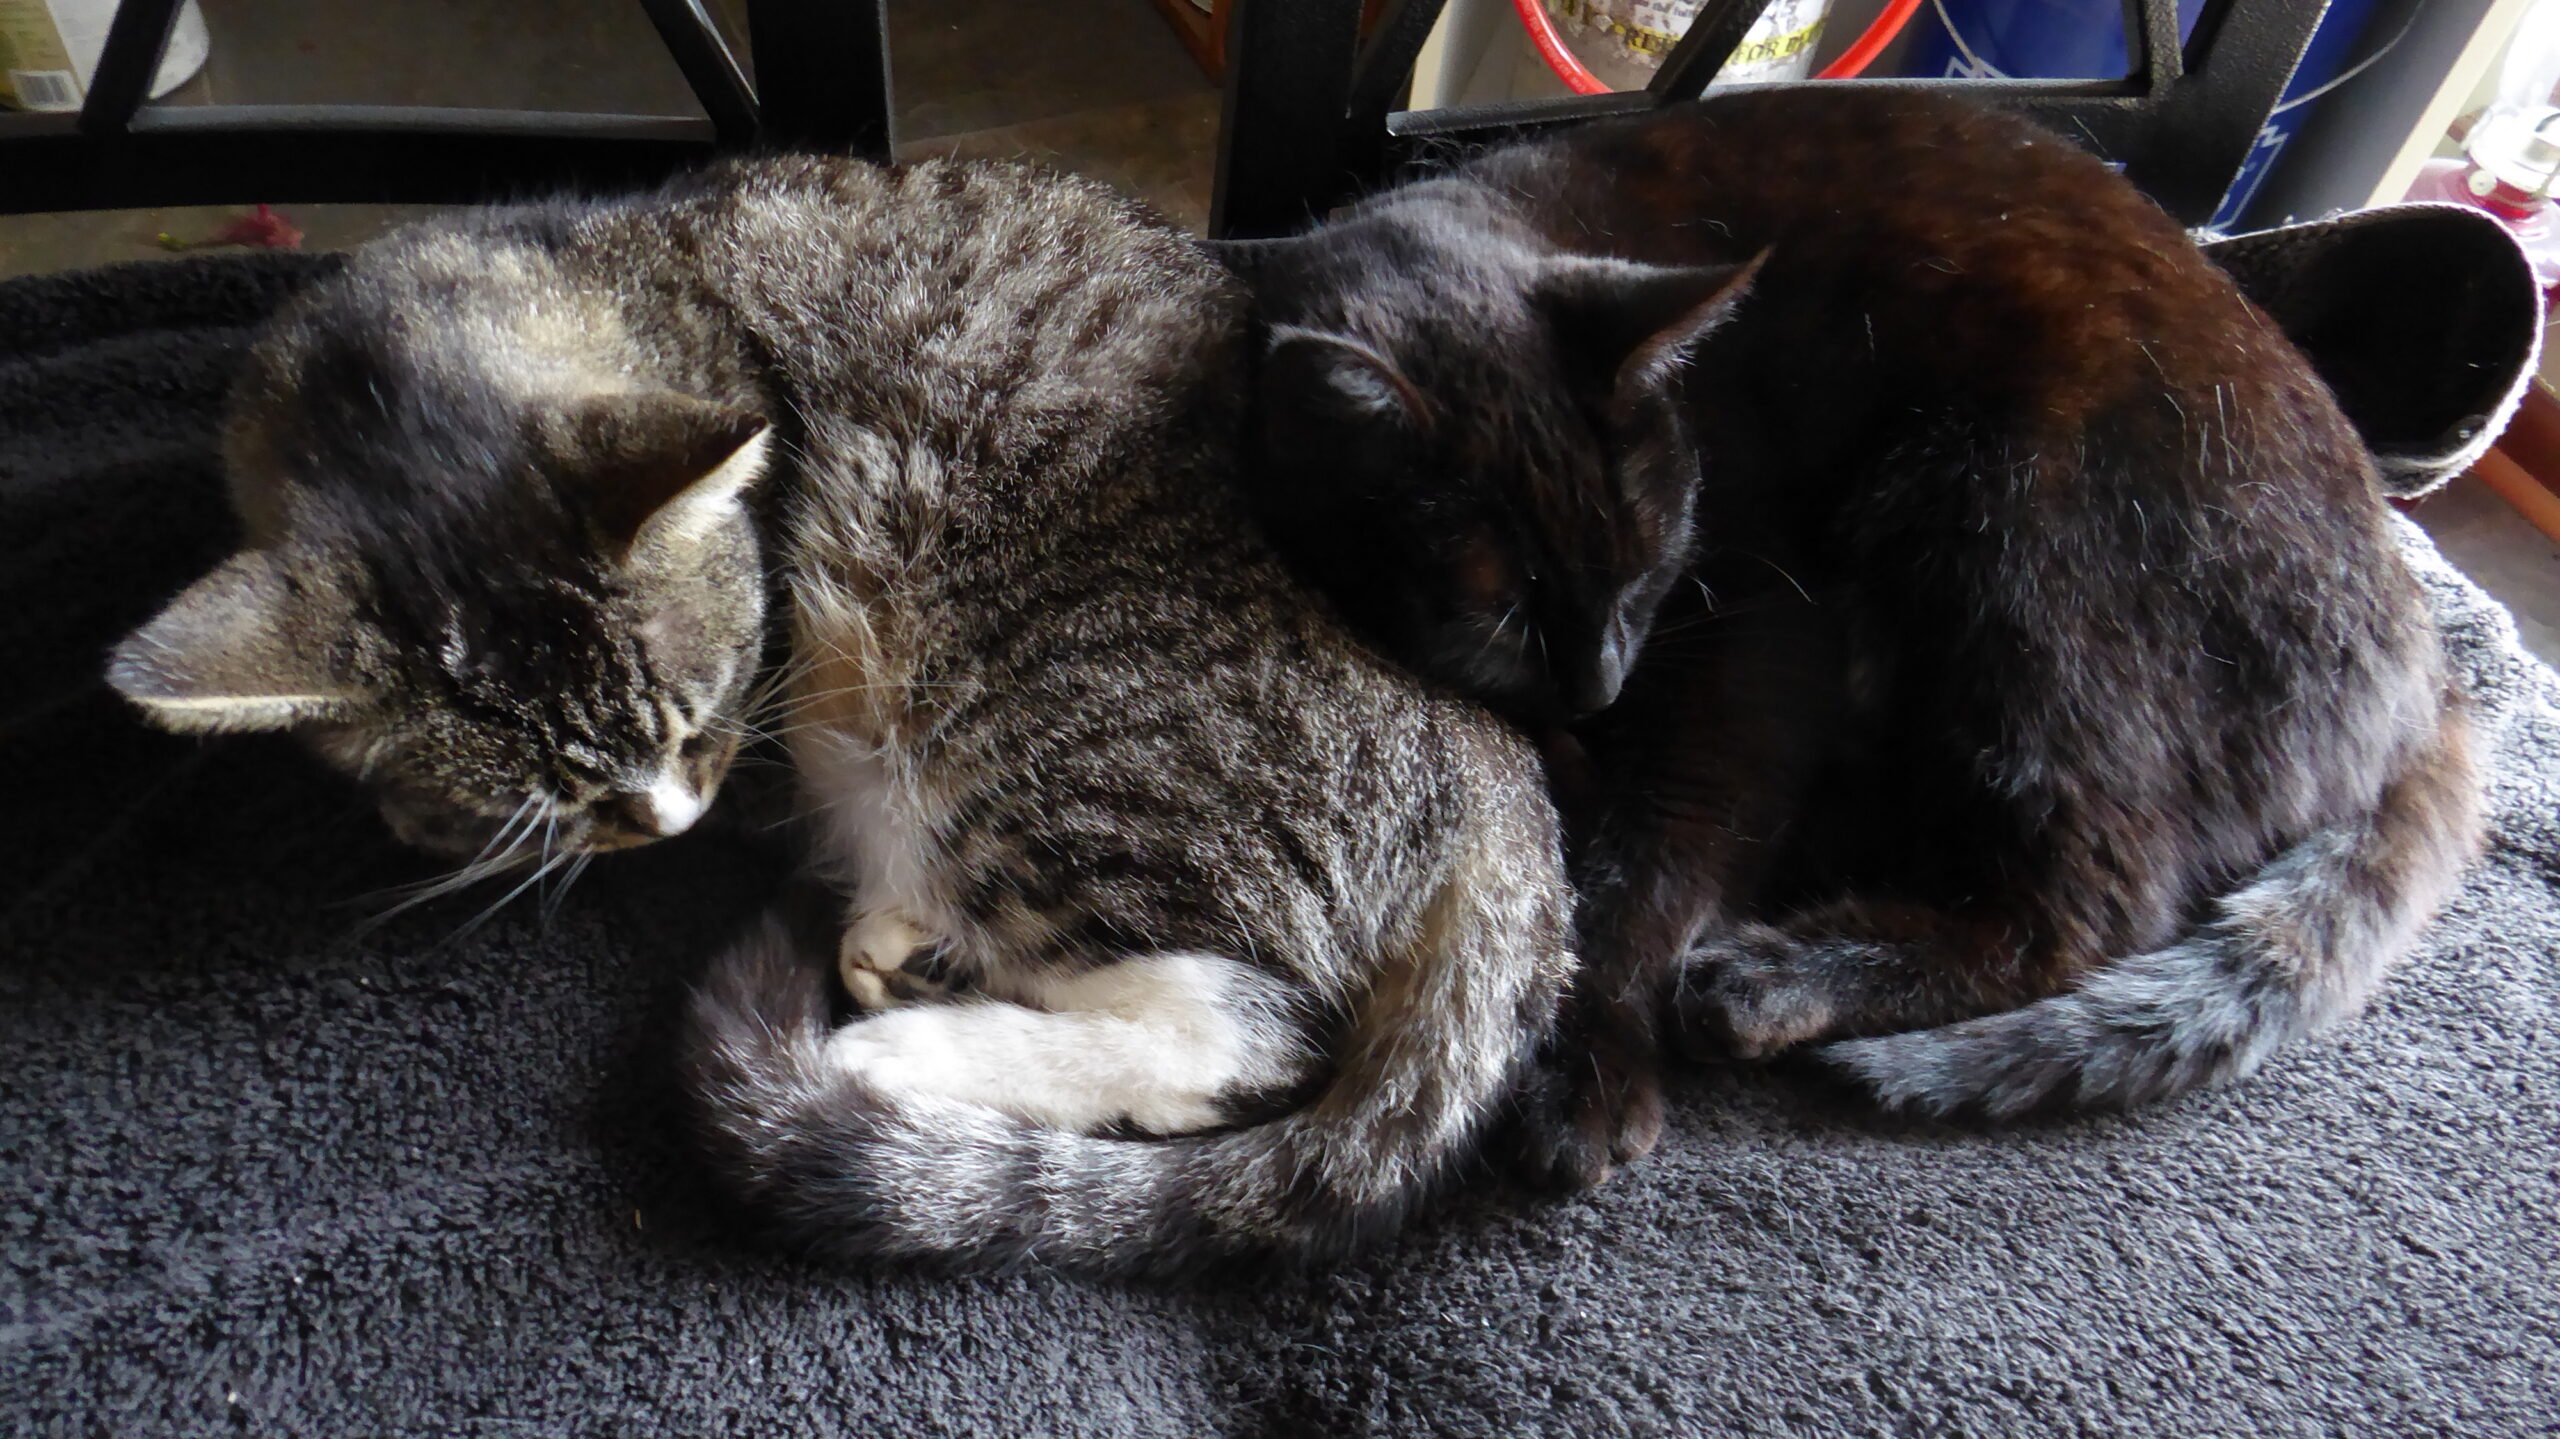 Jamie is a grey shorthair striped kitty all curled up for a nap and Dixie is curled up right beside with her head on Jamie's haunch, looking like a little shadow. Faith misses them terribly when she travels.